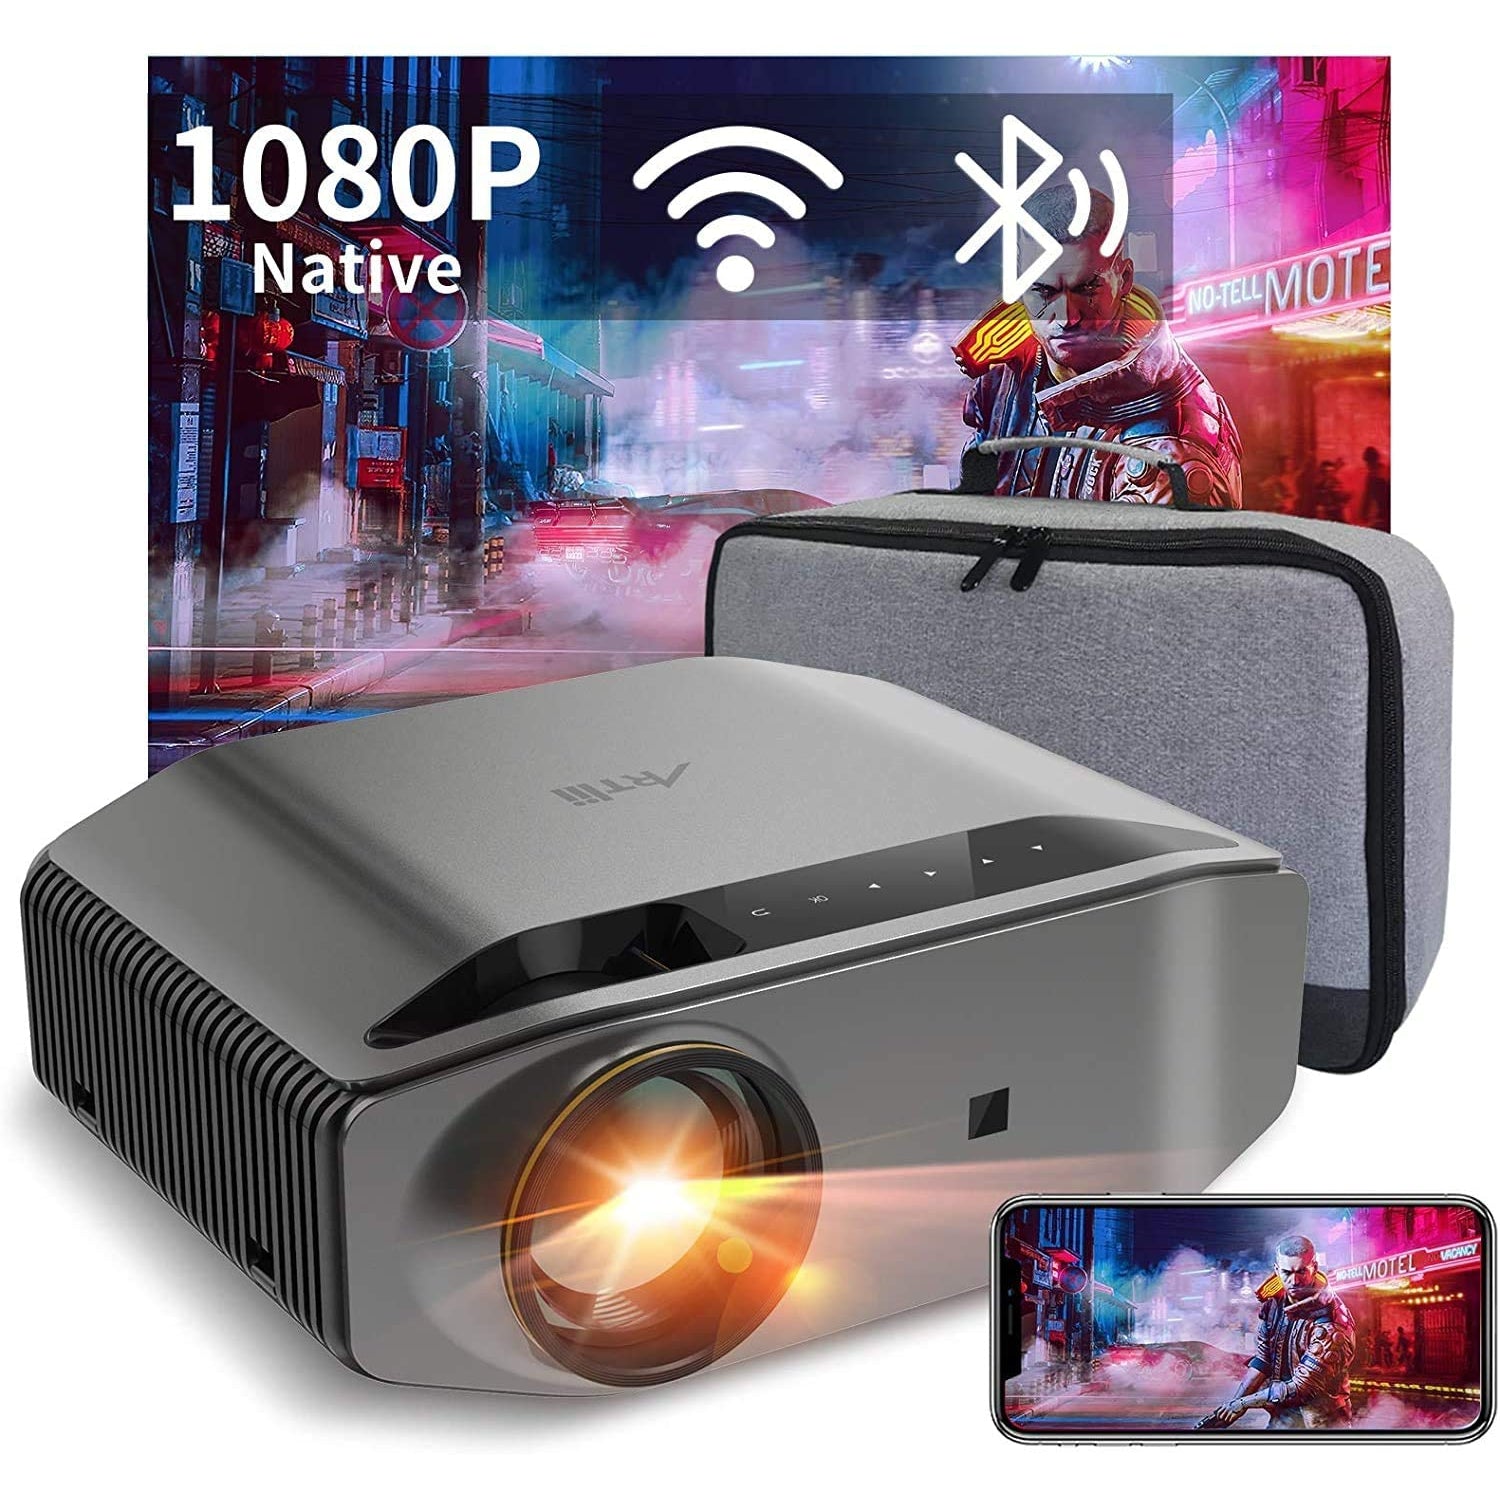 ARTlii Energon 2 Projector YG620 Pro Full HD Native 1080P Projector Compatible w/ TV Stick, iOS, Android, PS5 - Grey